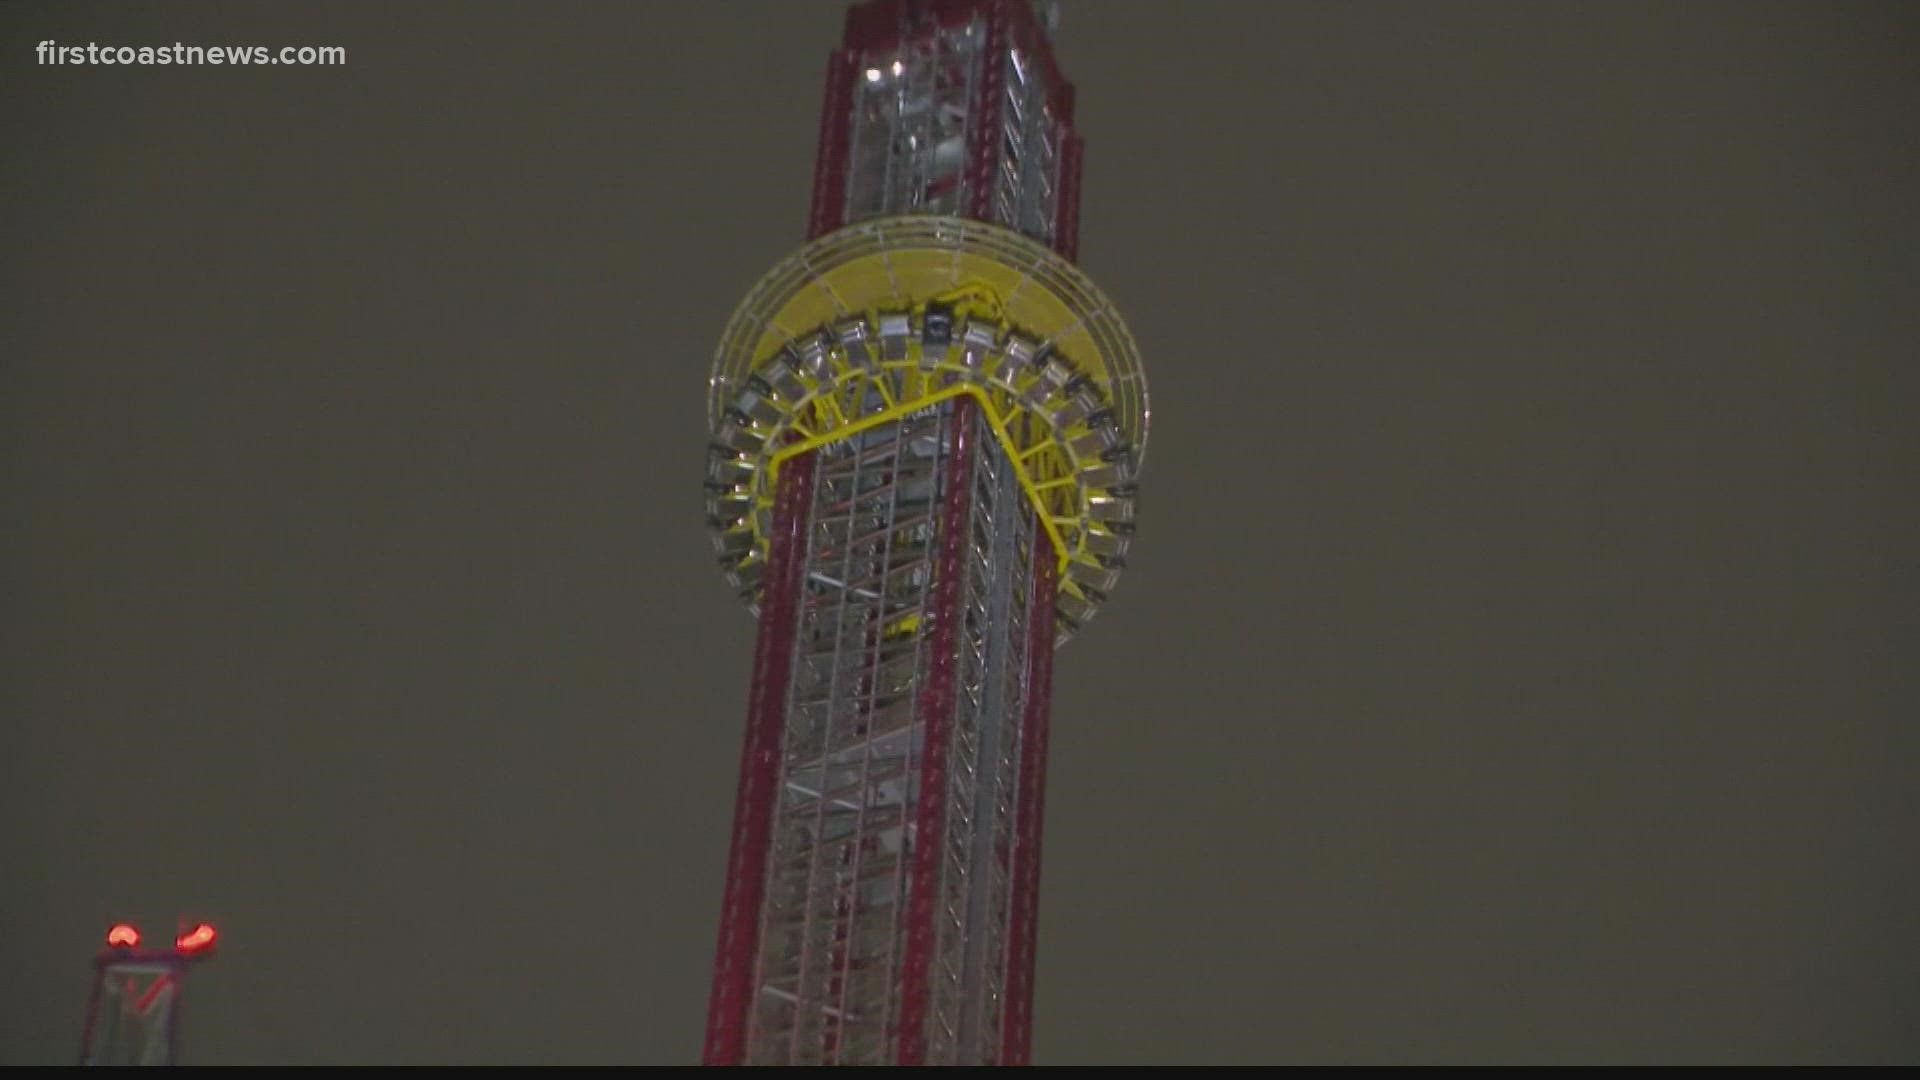 A 14-year-old has died after he fell from a free-fall thrill ride at Orlando's ICON Park, the Orange County Sheriff's Office reports.